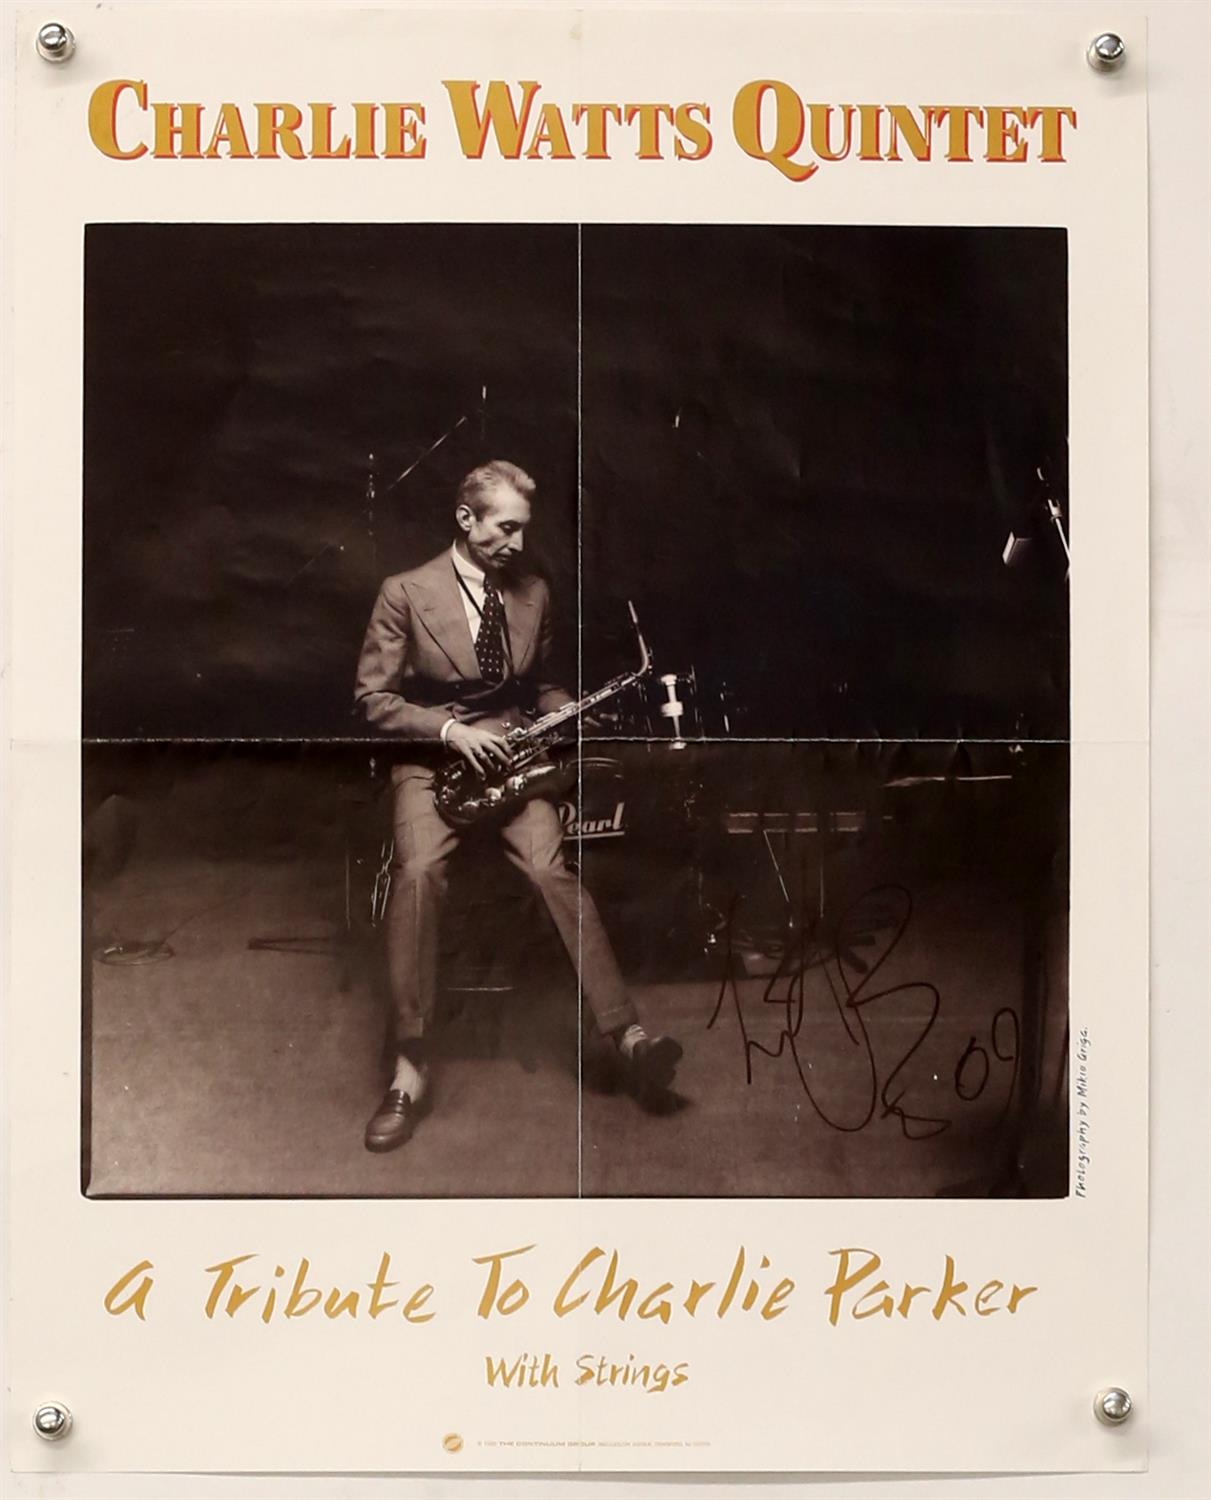 9 autographed Rock and Blues concert and promotional posters - including Charlie Watts Quintet,